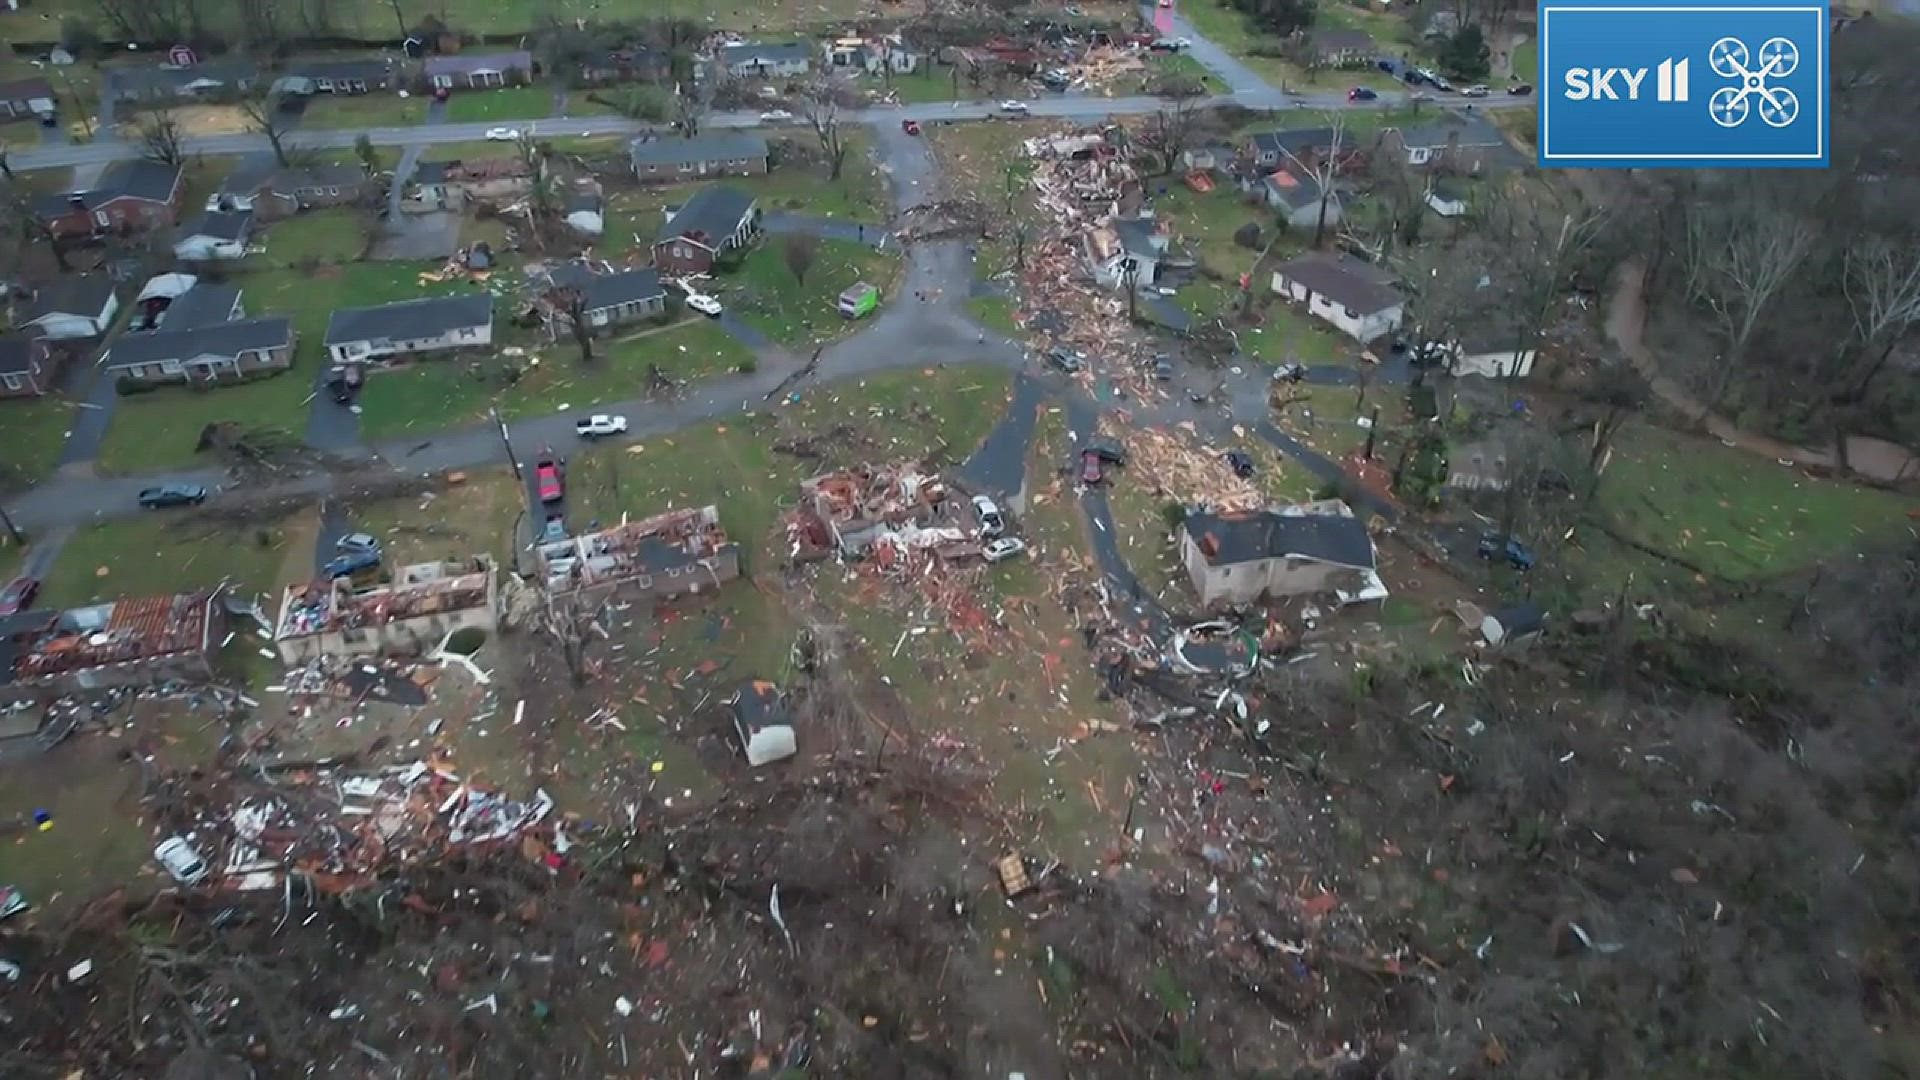 Kentucky tornado damage in Bowling Green is seen from the sky in this drone footage shot on December 11, 2021.